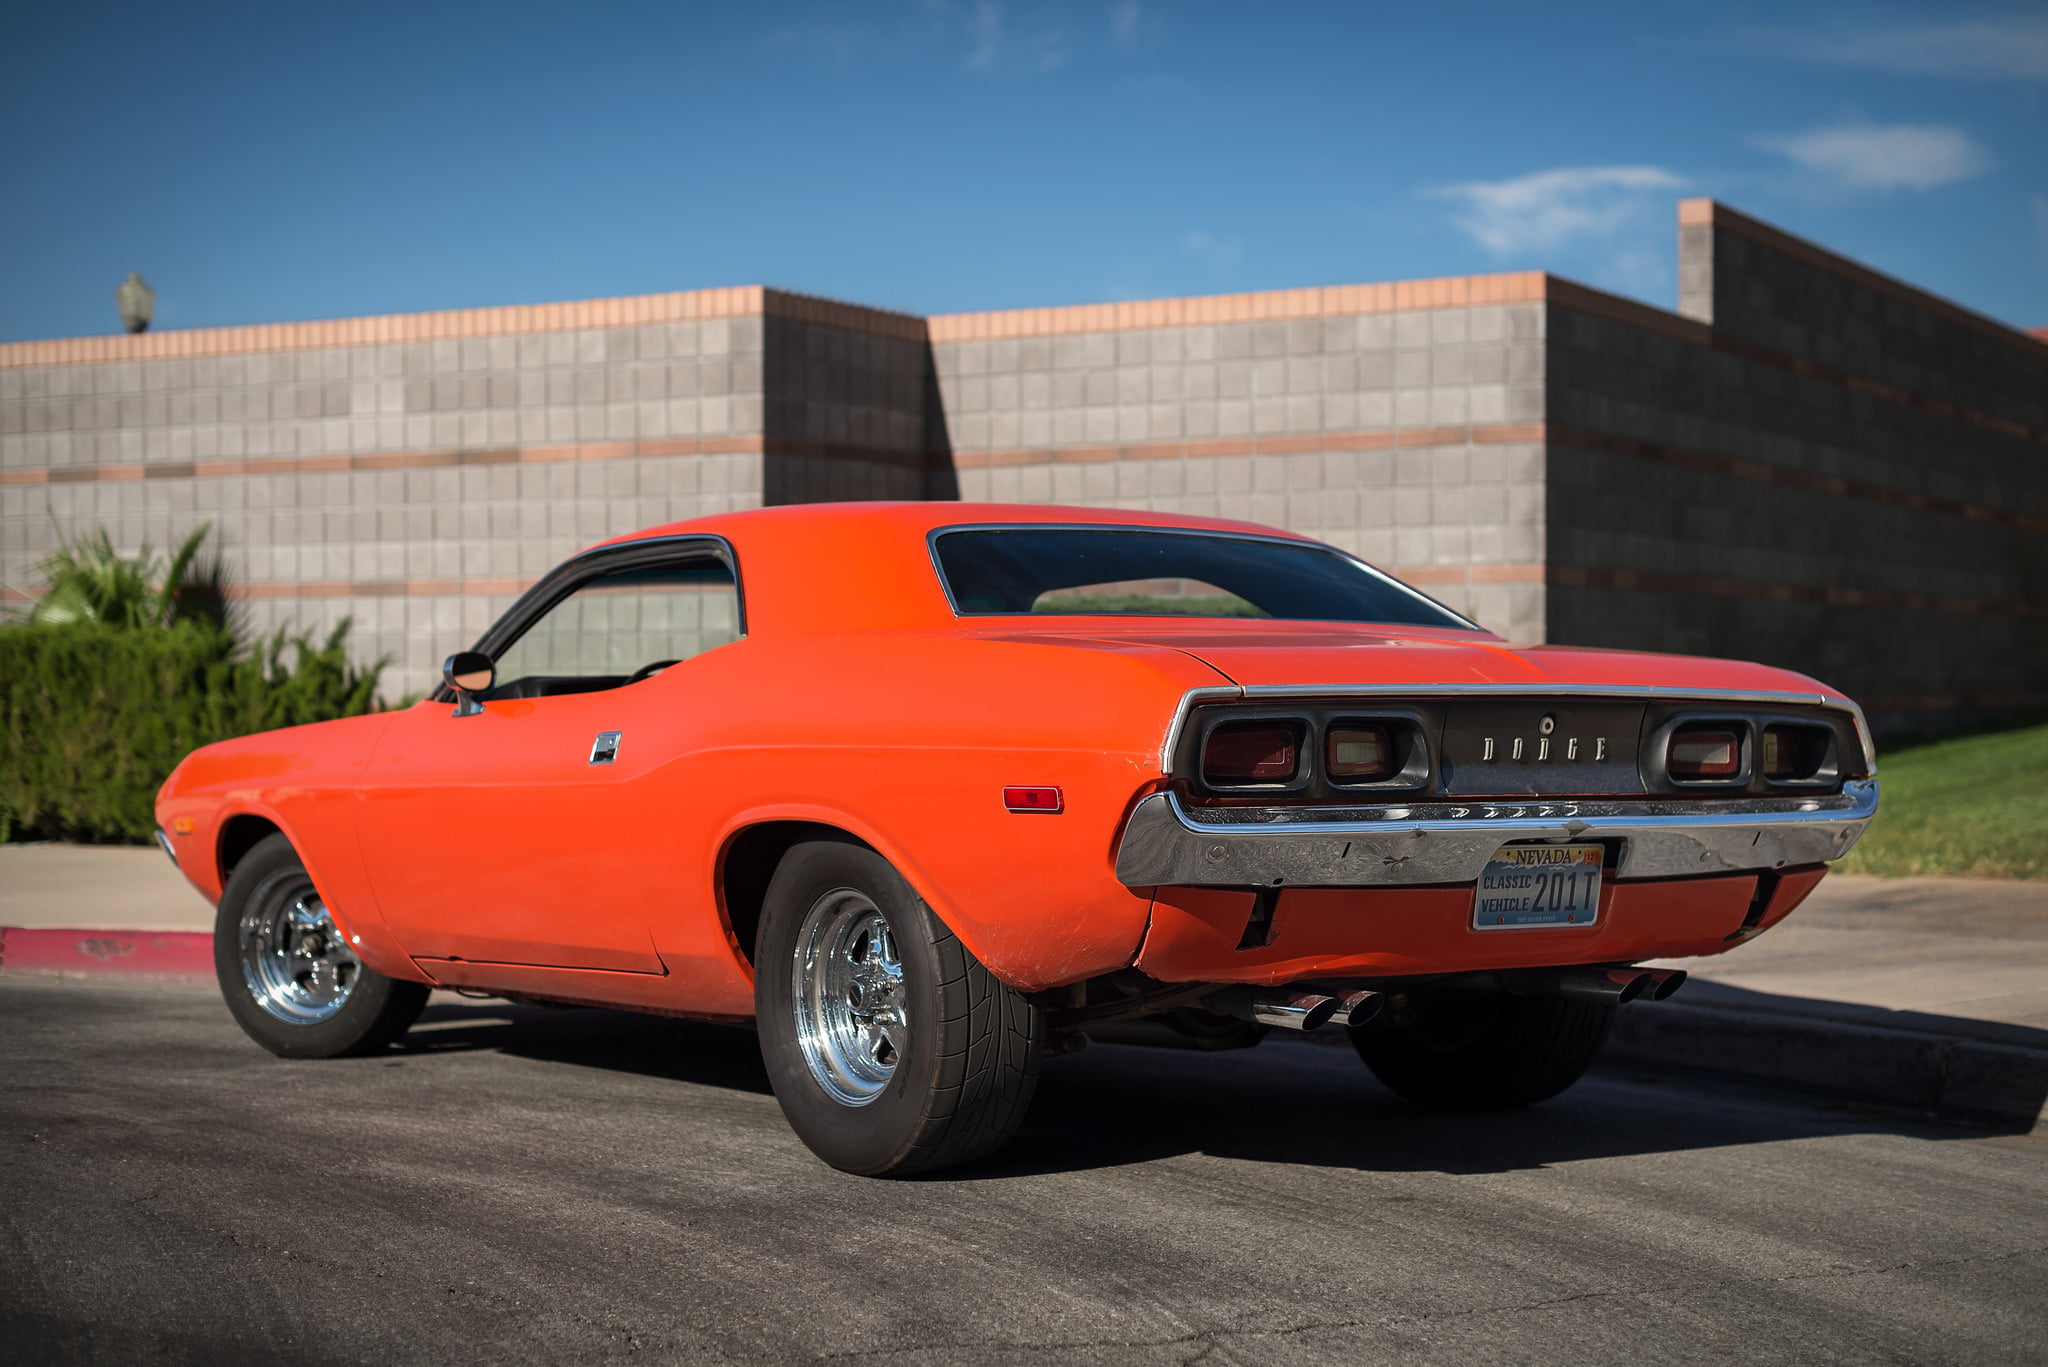 orange muscle car, dodge, challenger, 1974, red, rear view, land Vehicle